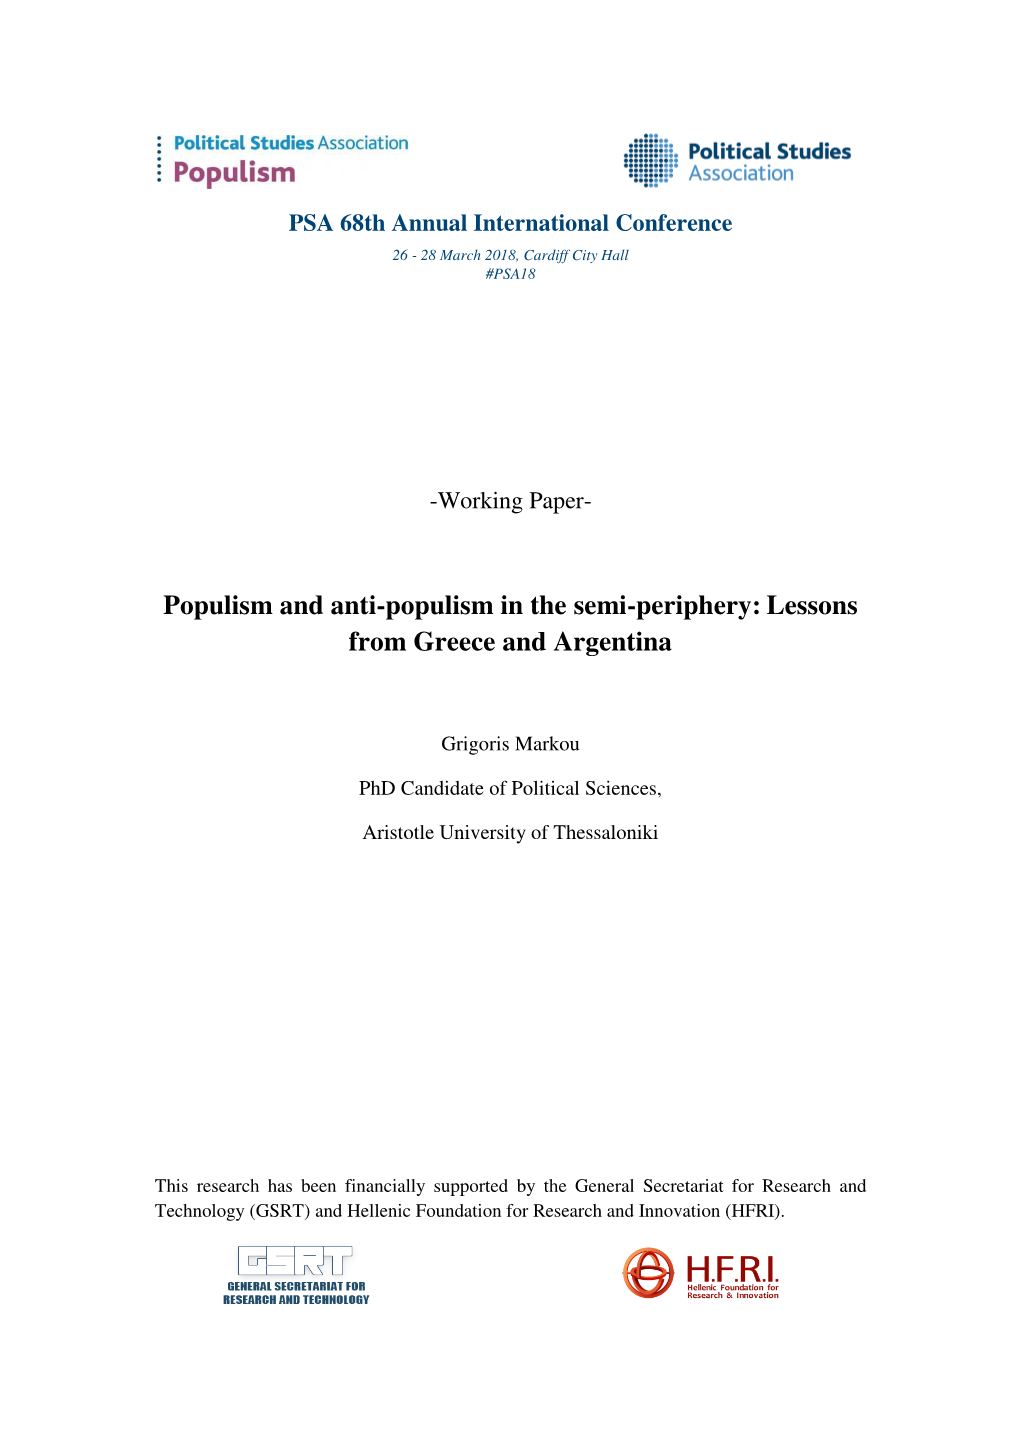 Populism and Anti-Populism in the Semi-Periphery: Lessons from Greece and Argentina